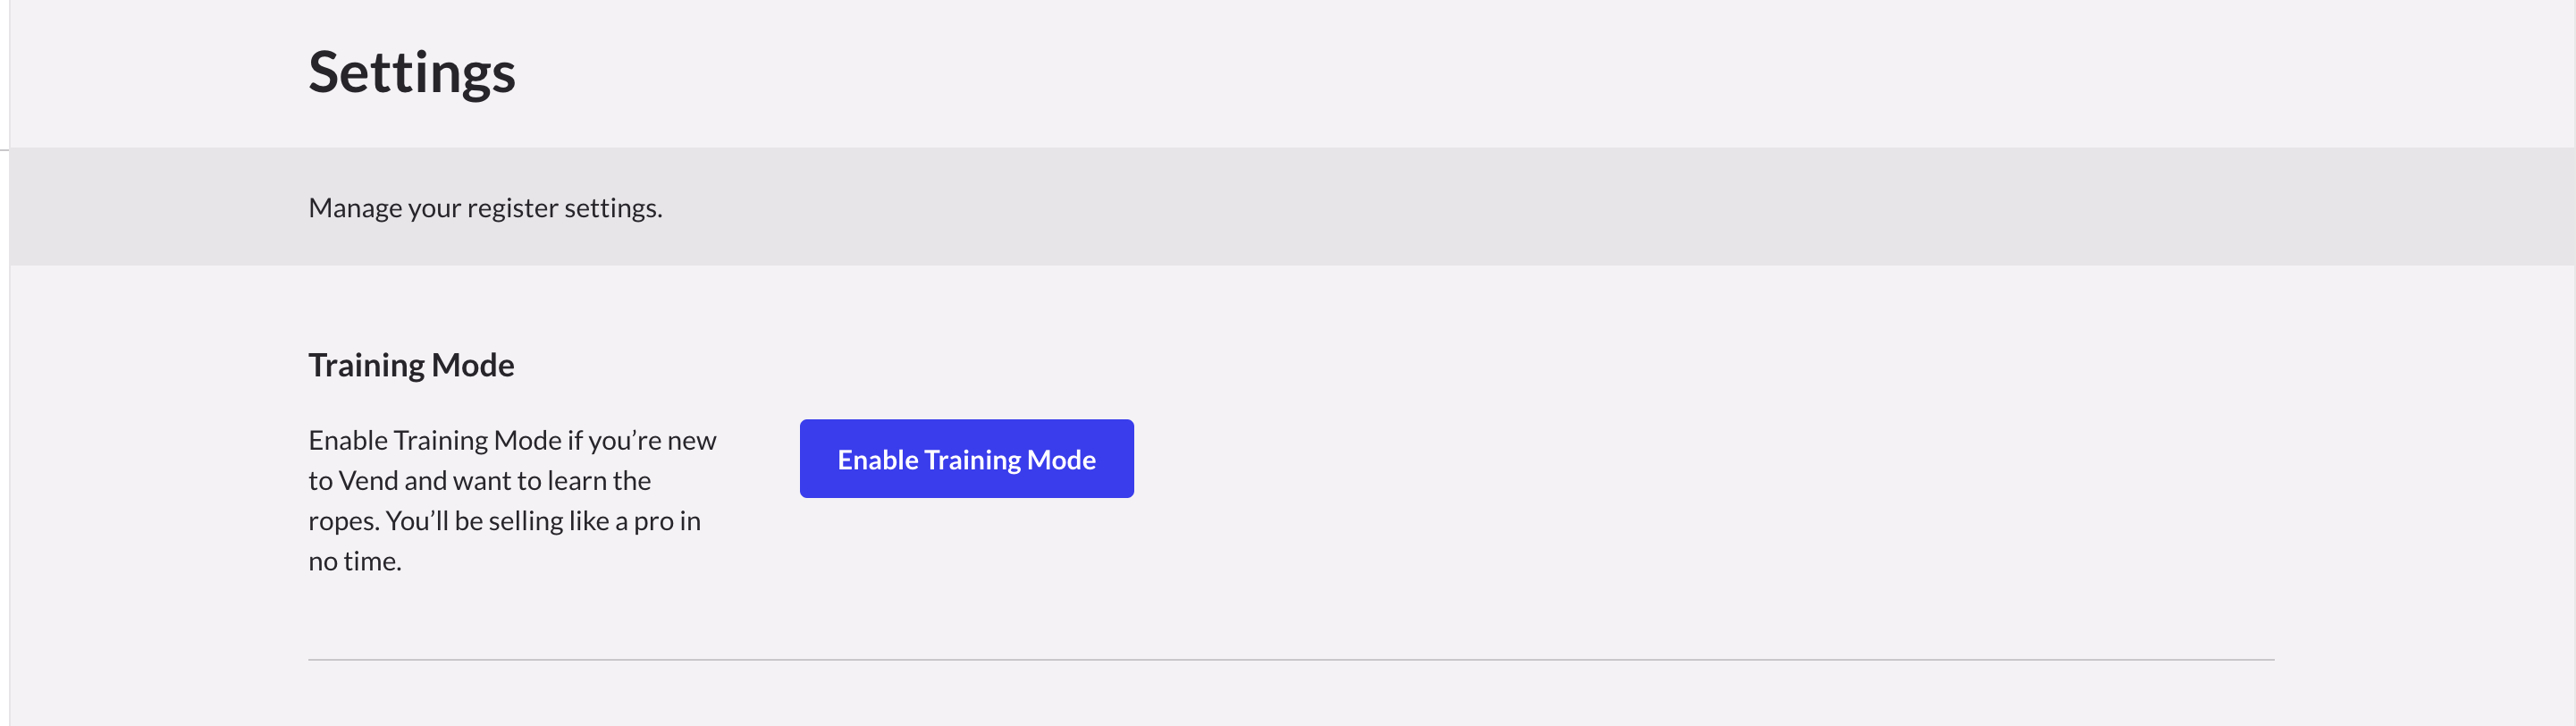 The Settings page showing the Training Mode section and Enable Training Mode button